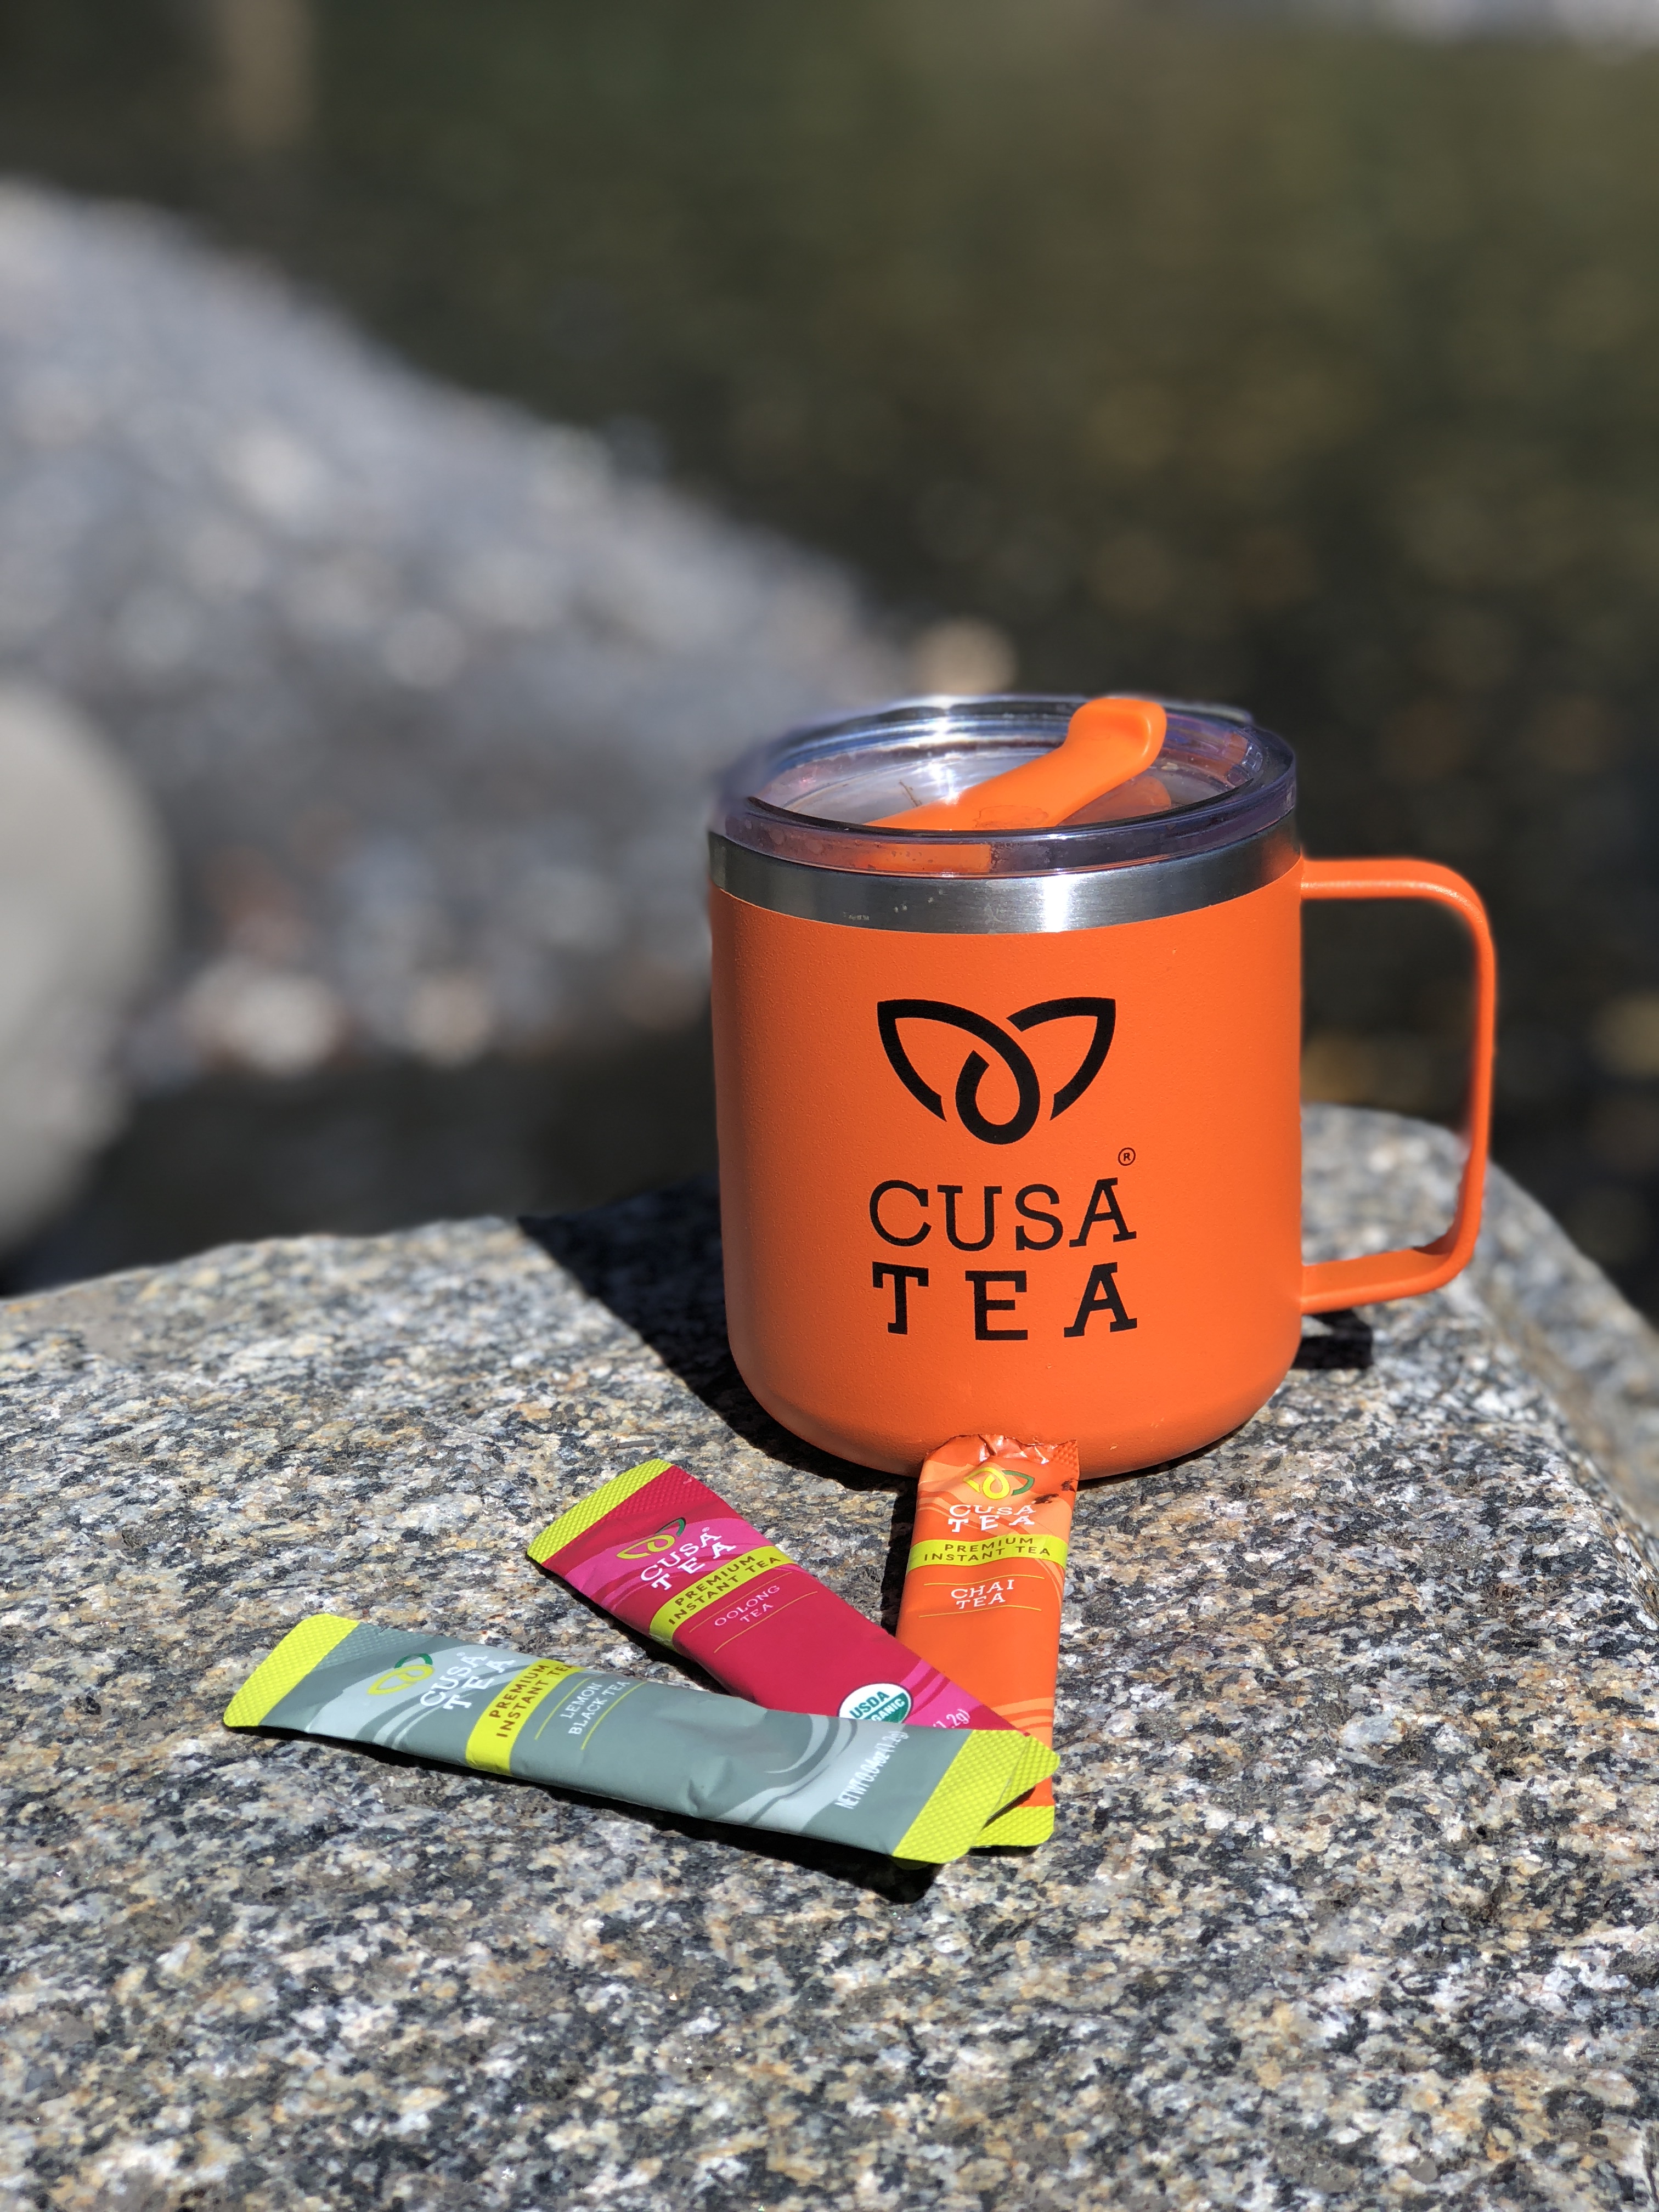 Currently available in six flavors, Cusa Tea offers a taste and style of premium instant tea to suit any tea drinker. Made only from pure tea and real fruit or spices, each flavor achieves its smooth and balanced taste without the use of additives, fillers, preservatives or sugar.